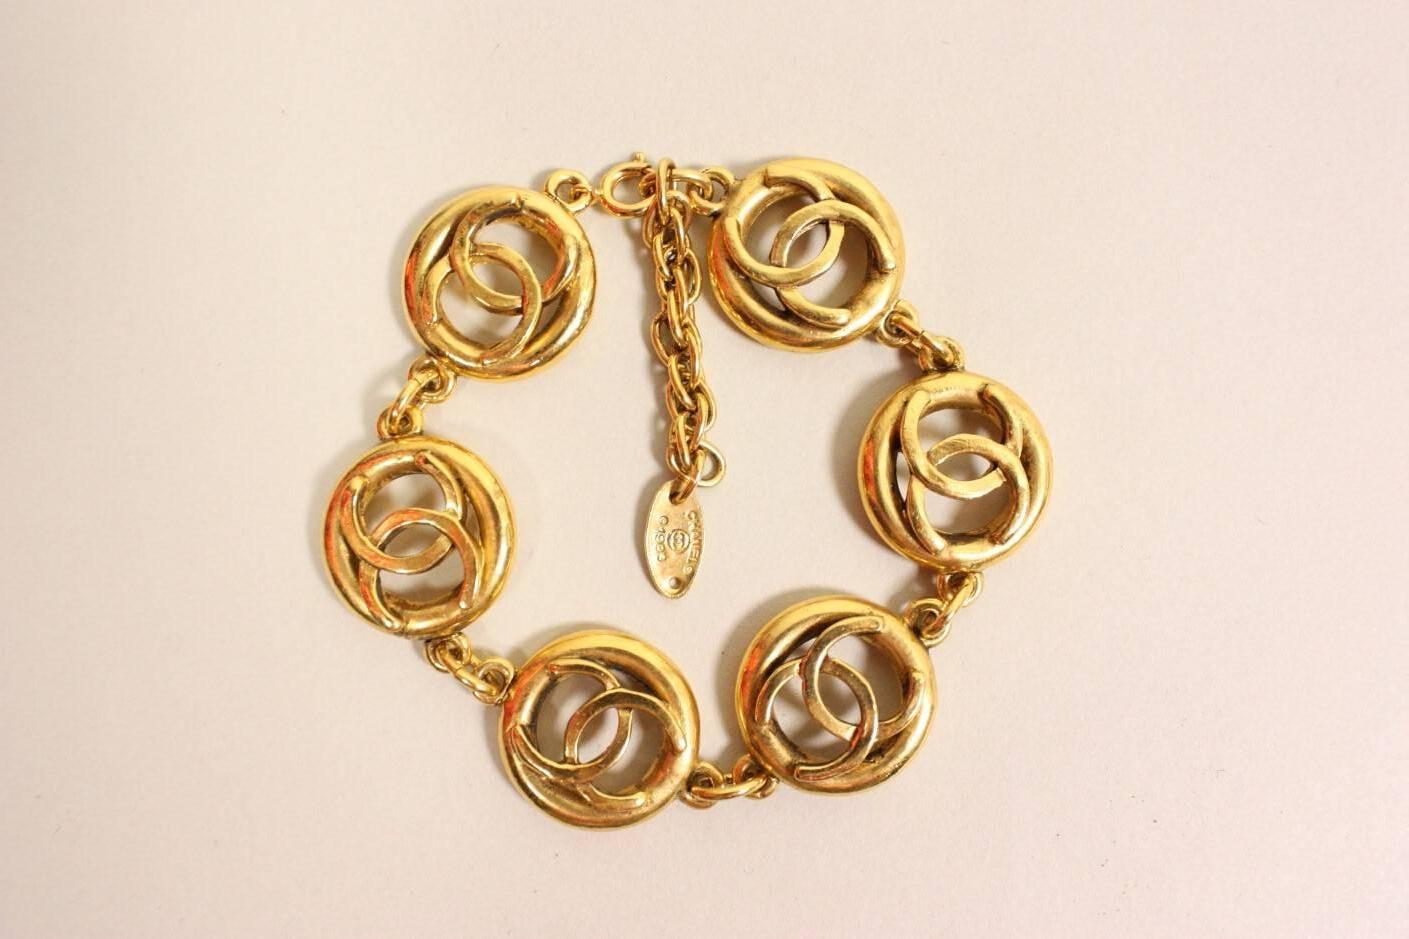 Vintage bracelet from Chanel dates to 1983 and is made of gold-toned metal in an interlocking C's pattern.  Adjustable length.